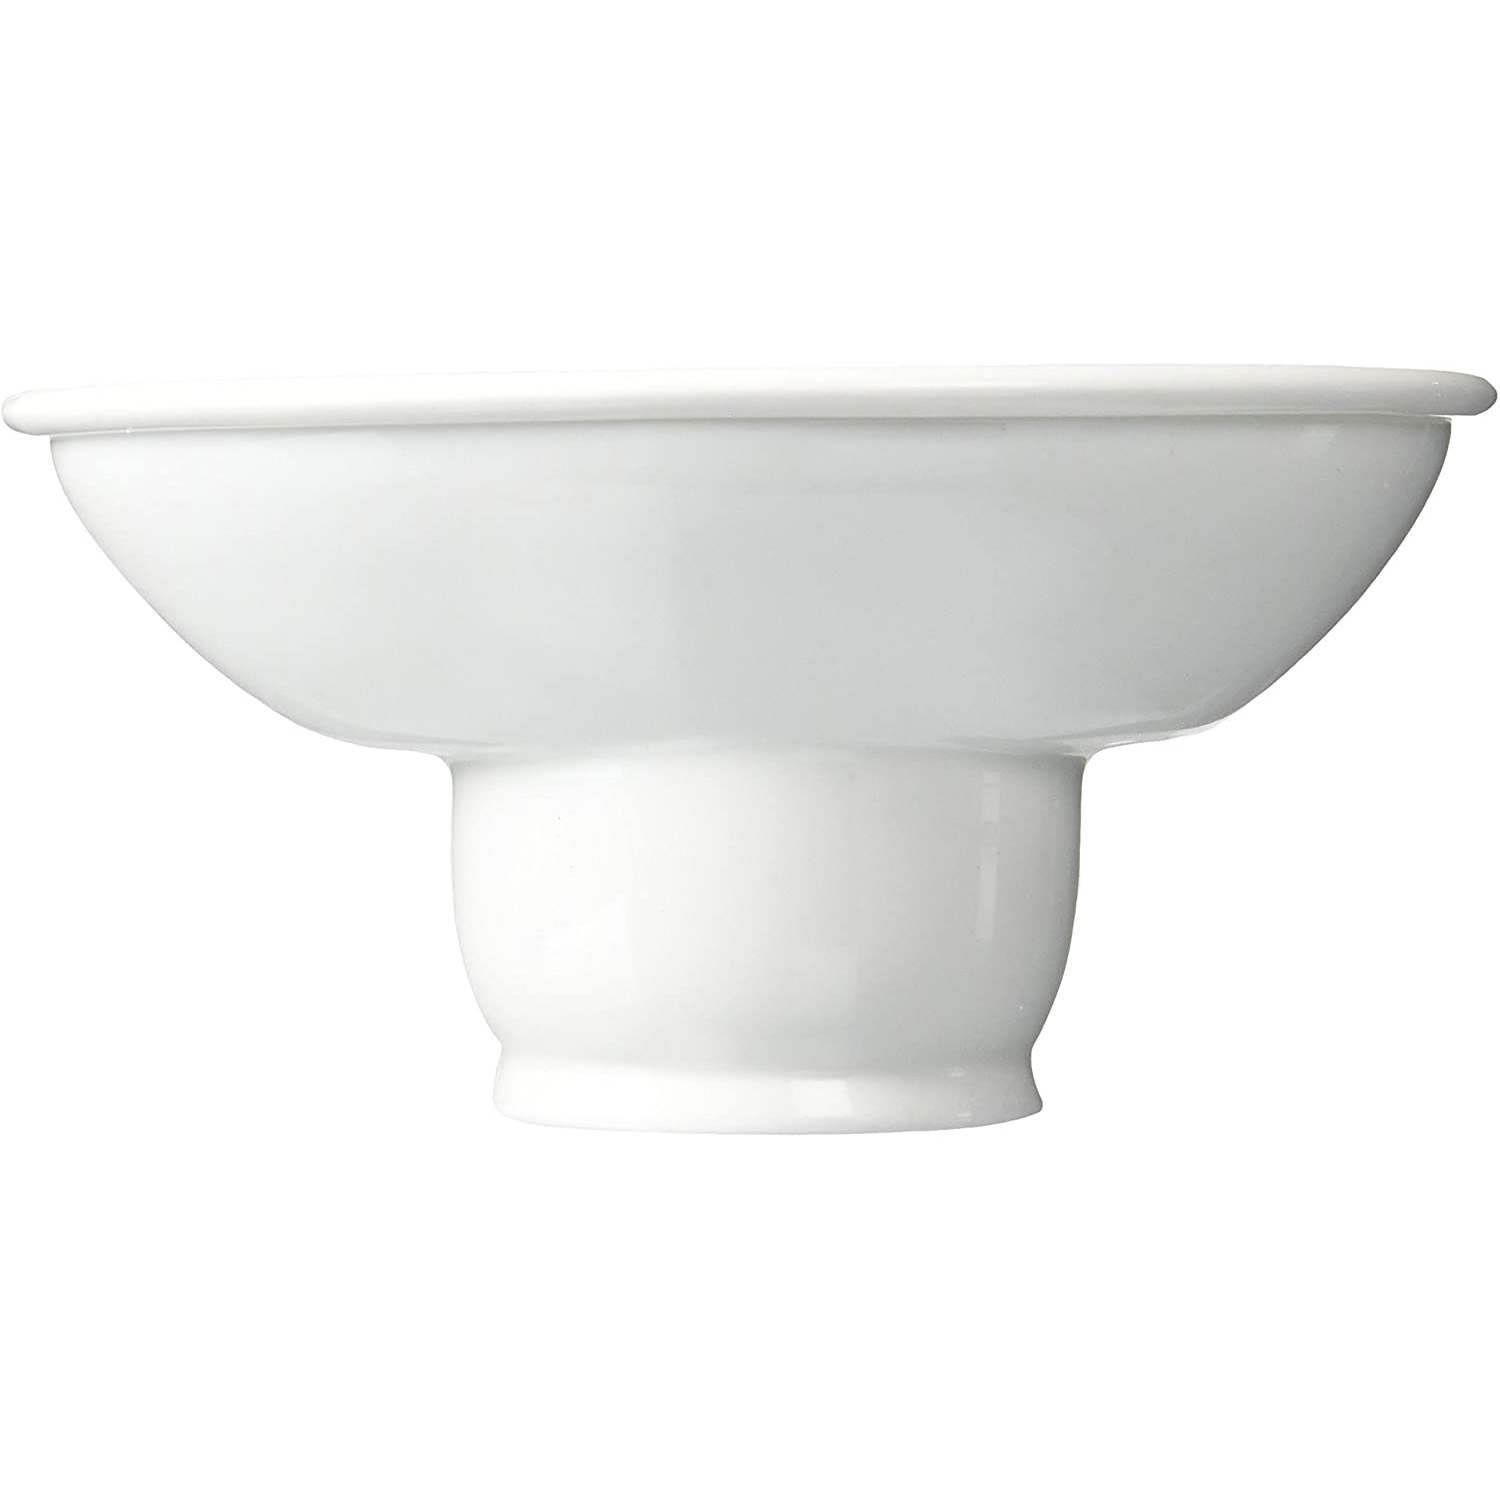 Perrin & Rowe Top & Bottom Soap Dish w/Footed Base in White